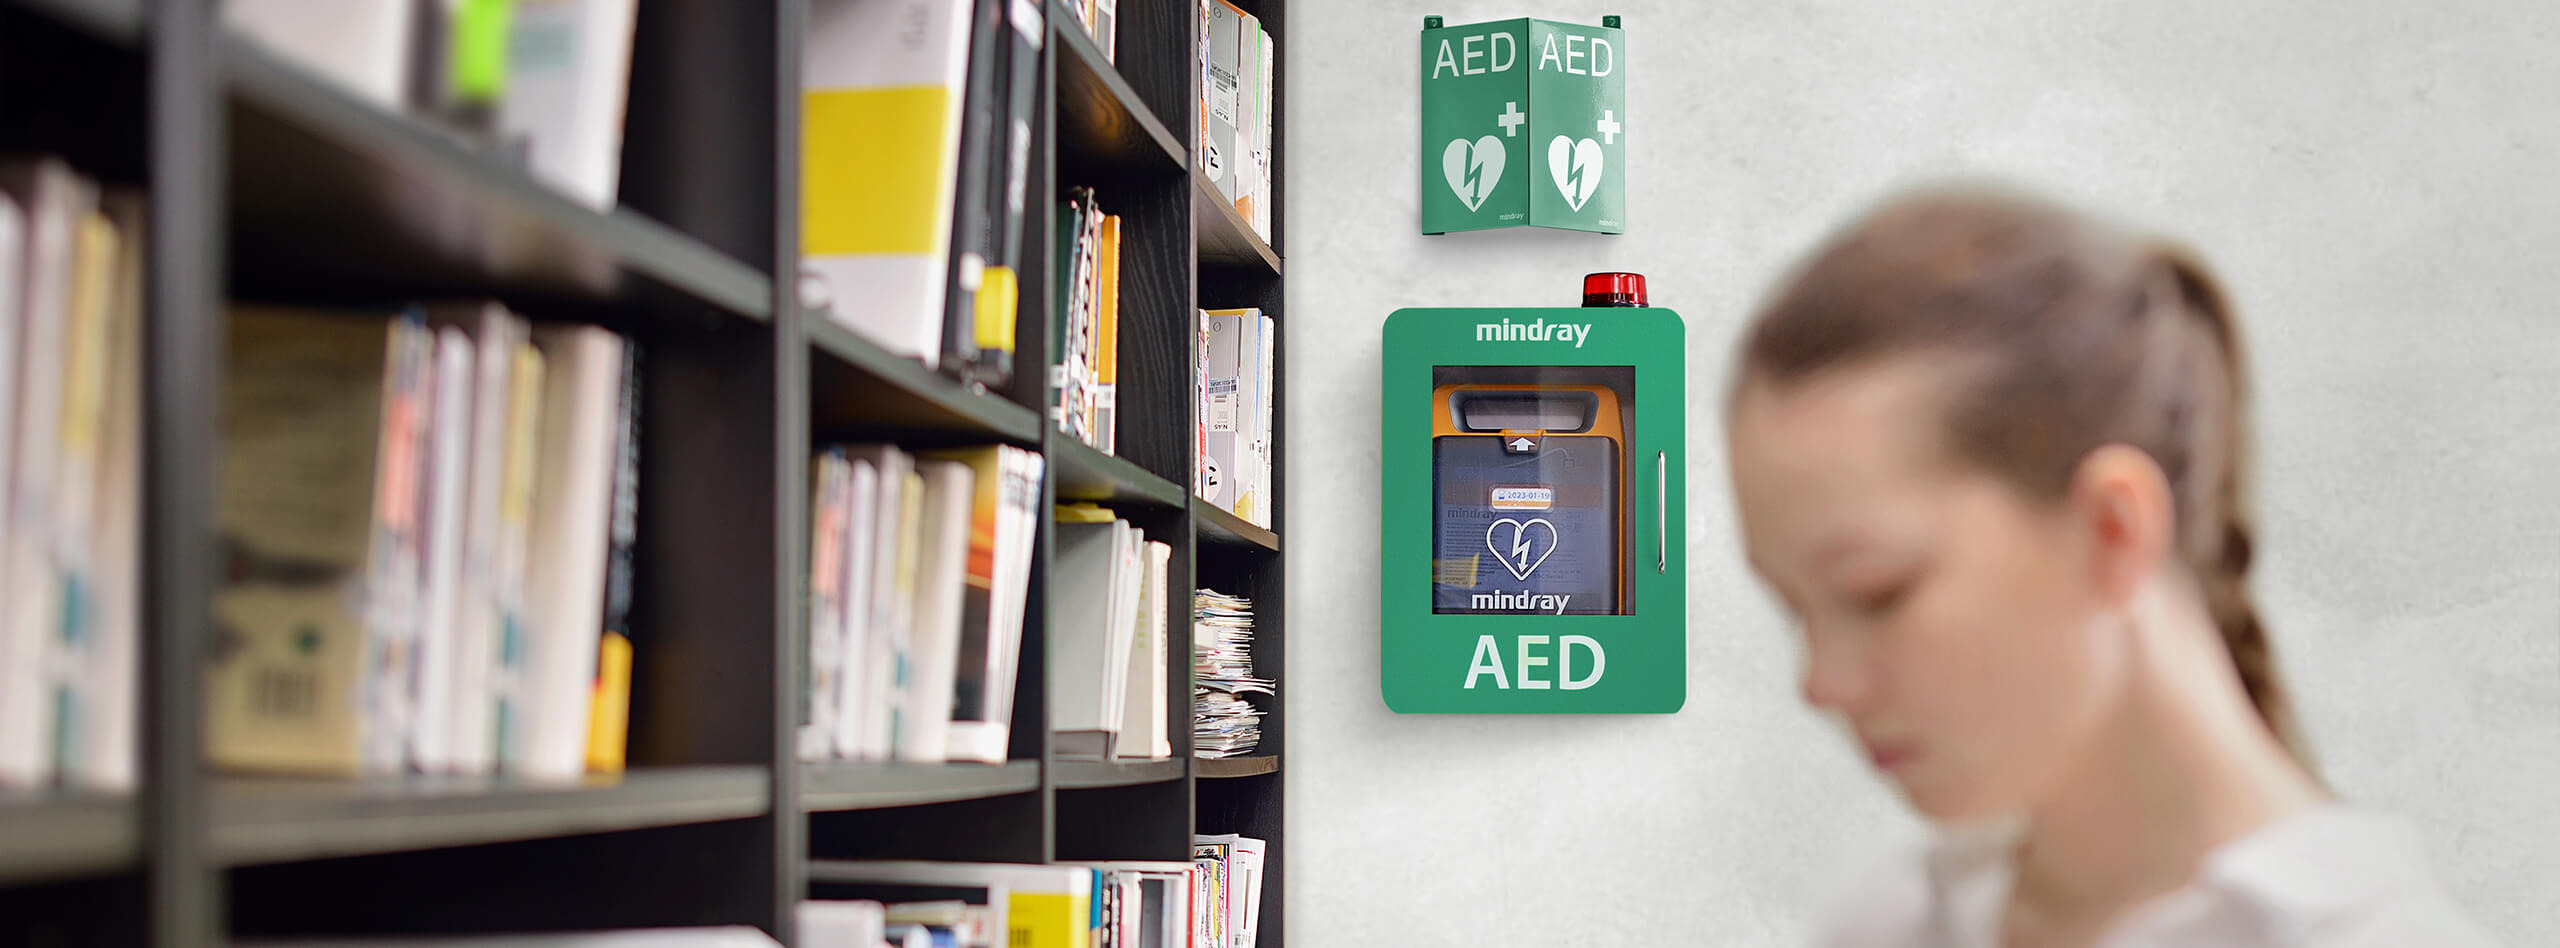 Automated External Defibrillator in Public library